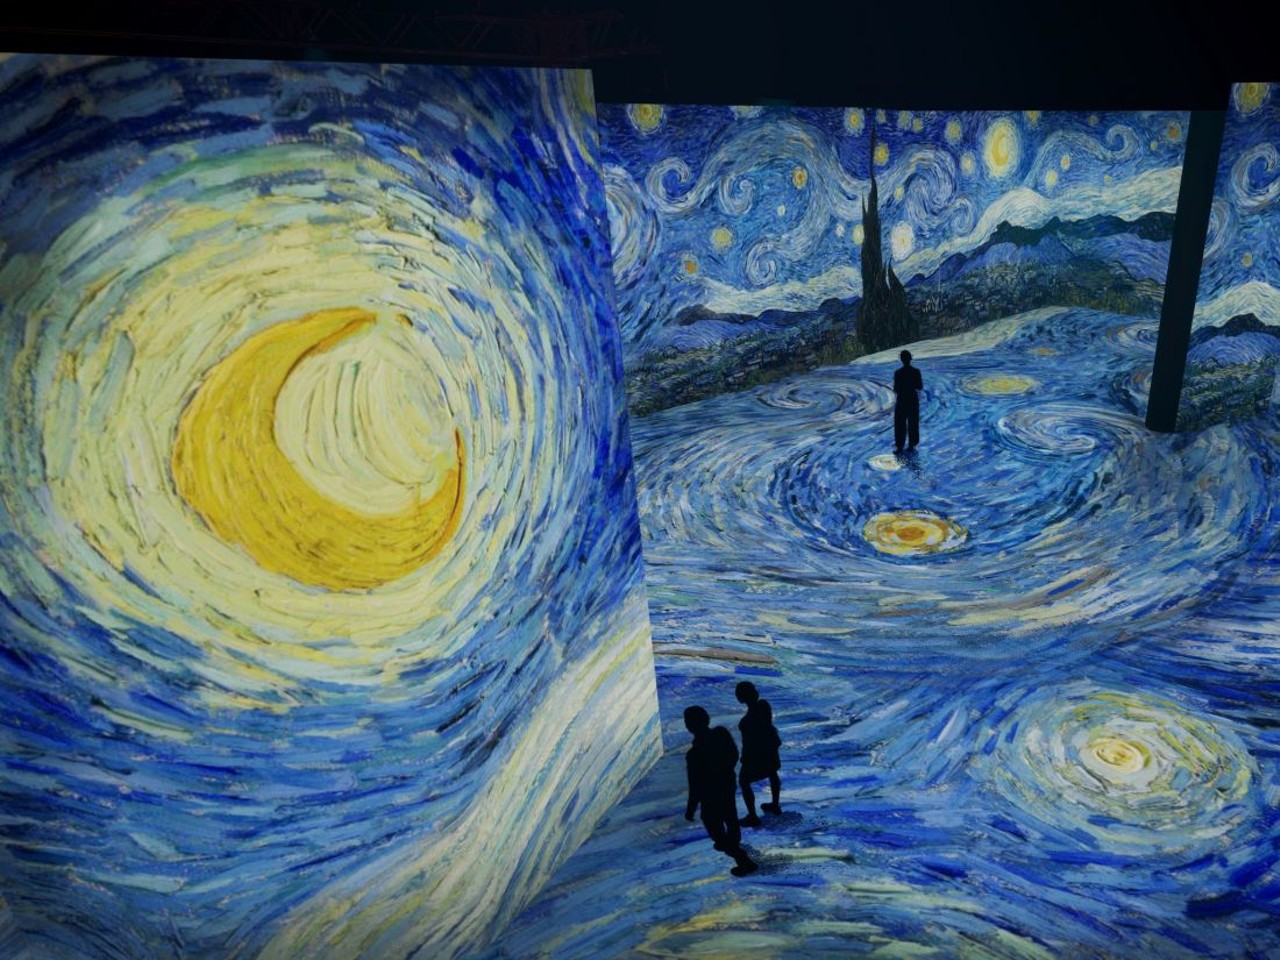 Step inside a Van Gogh painting
Two dueling exhibitions based on the work of Vincent van Gogh are traveling across the country, with stops in Detroit along the way. (Which is annoying &#151; aside from being confusing, it's icky to think of others profiting off of the work of an artist who reportedly only sold one painting during his life and died penniless). Anyway, the first stop is Beyond Van Gogh: An Immersive Experience (vangoghdetroit.com),which will project animated versions of his paintings on the walls of Detroit's TCF Center. The other exhibit, Immersive Van Gogh Exhibit Detroit (detroitvangogh.com), arrives in October at a venue TBA.
Courtesy of Beyond Van Gogh